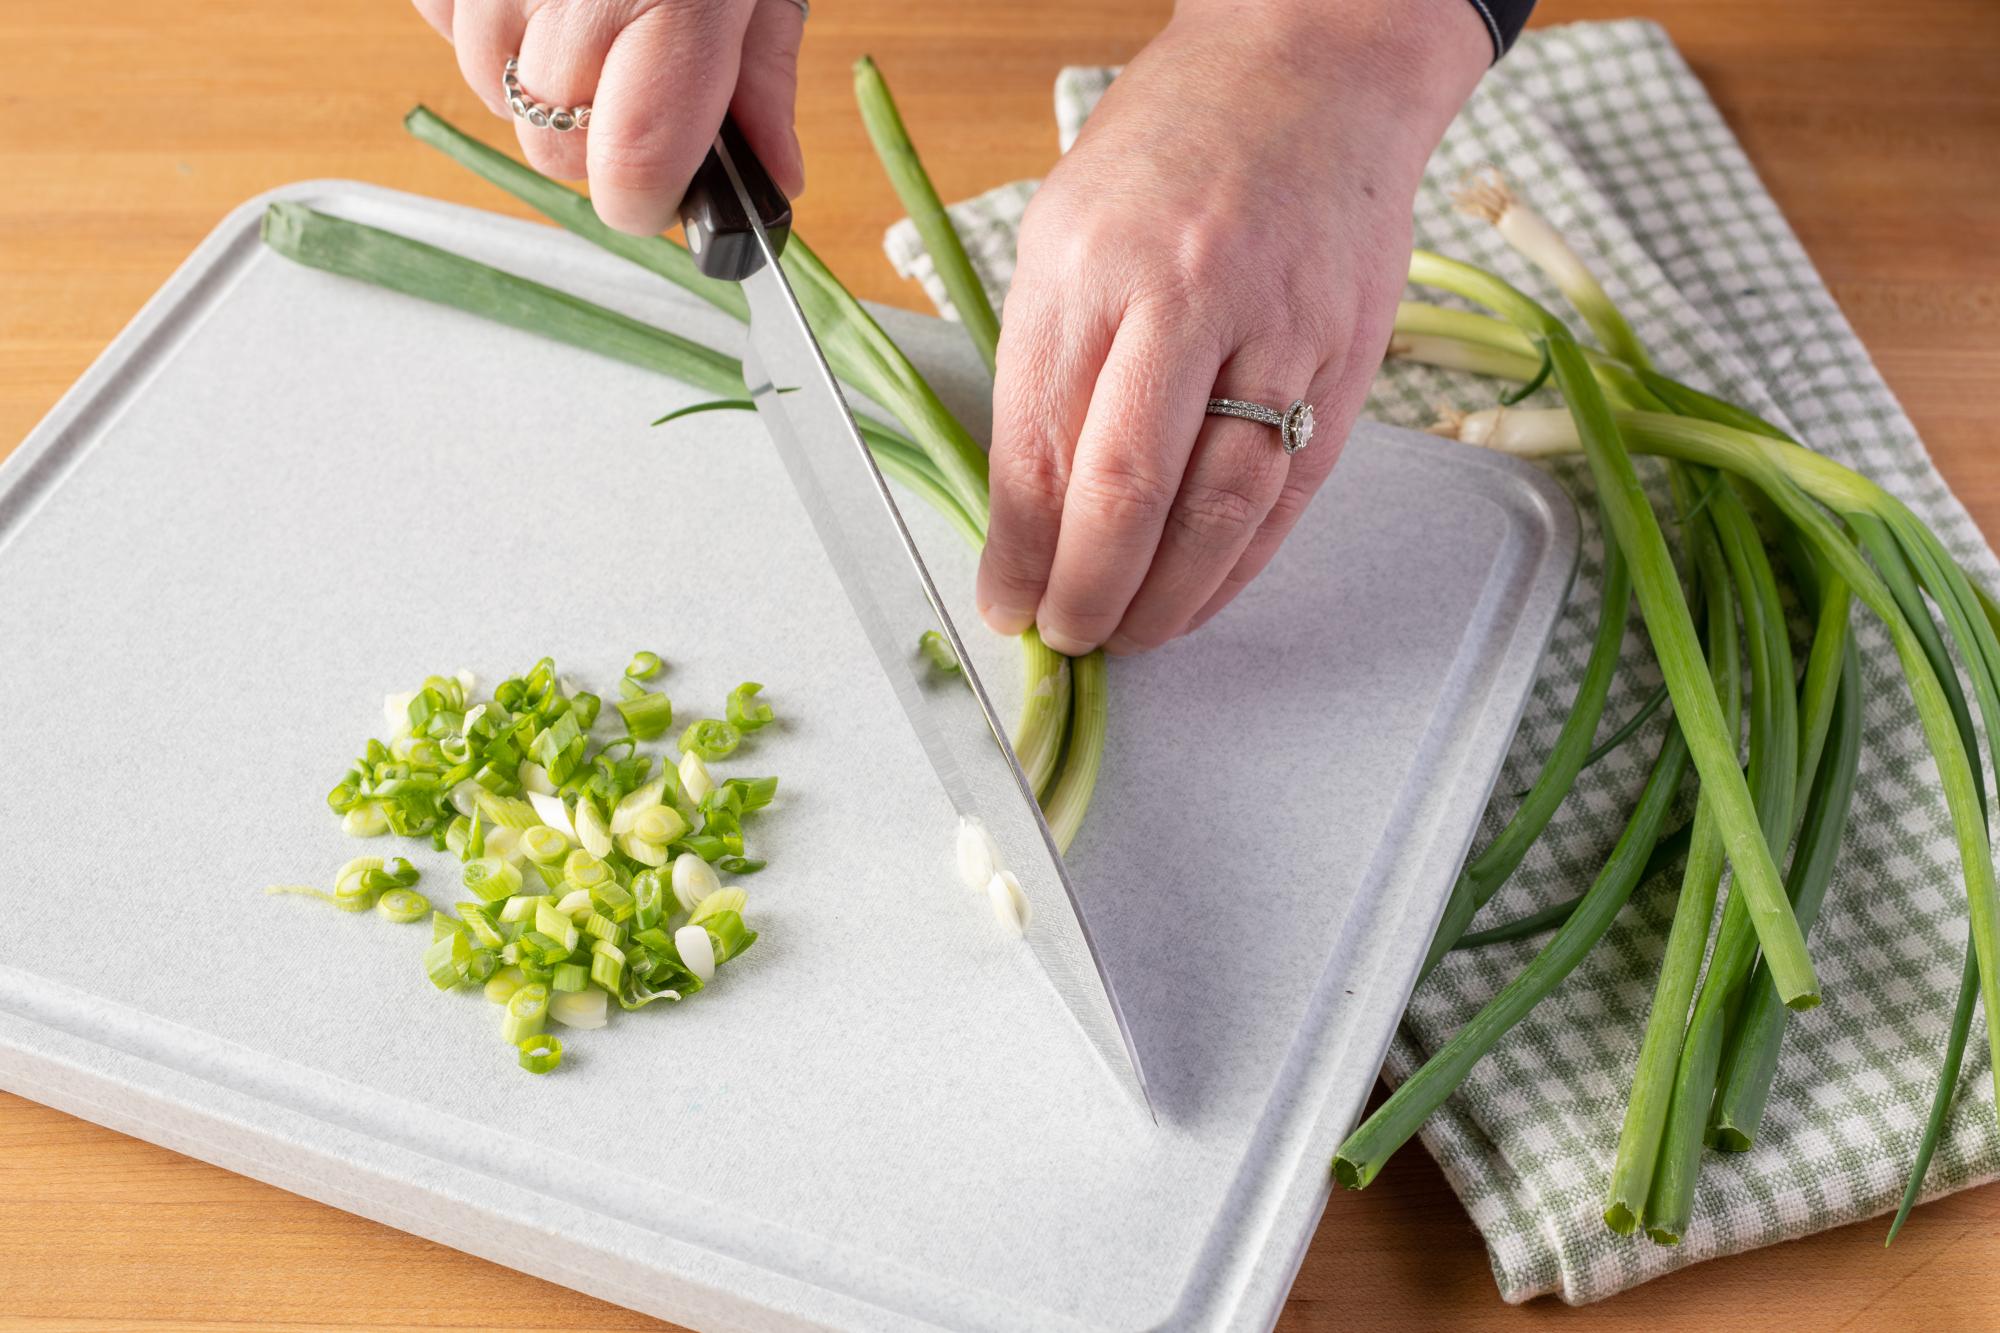 Slicing the green onions with a Petite Chef.